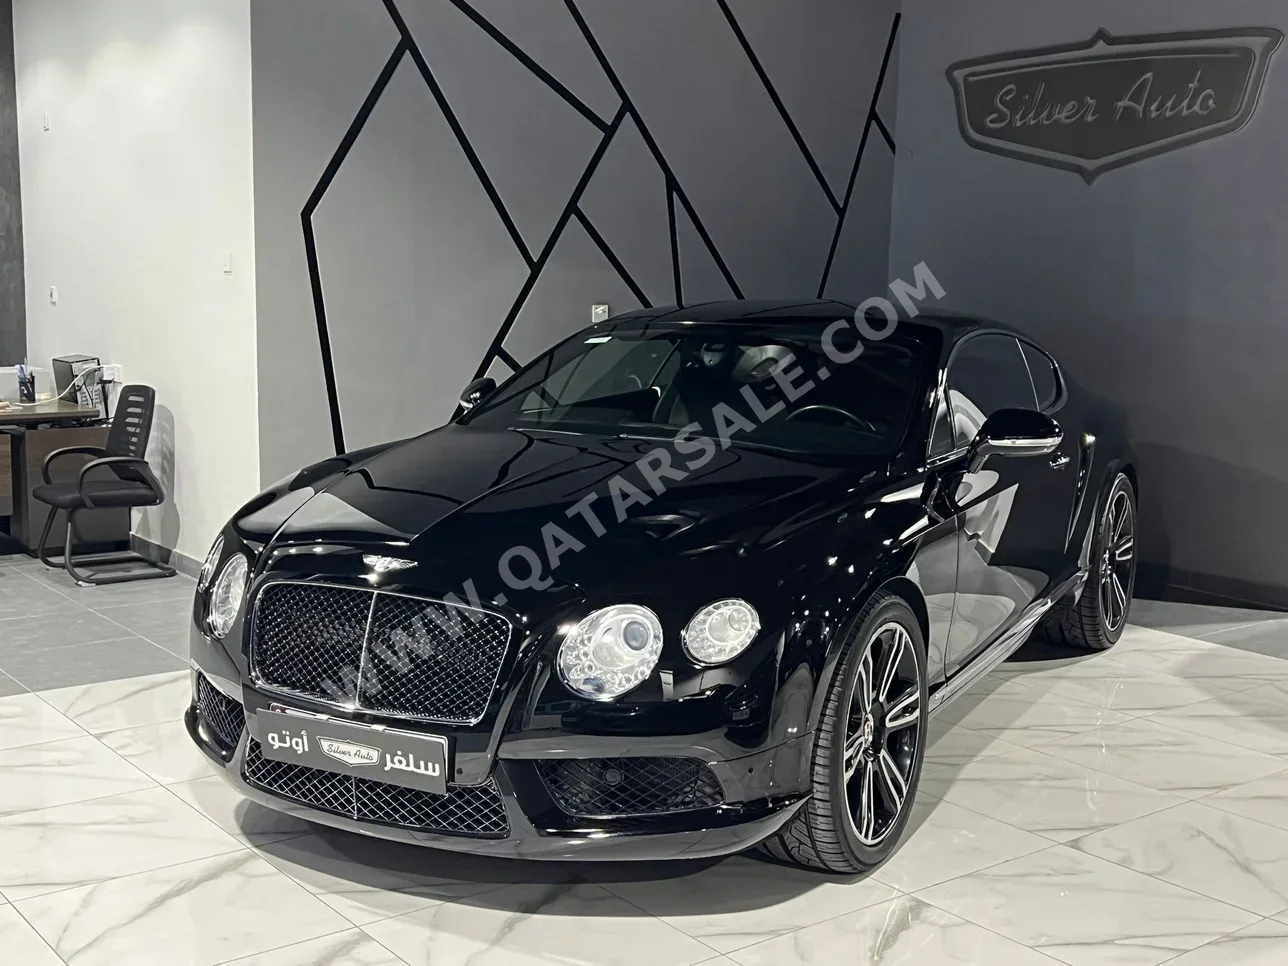 Bentley  GT  Sport  2013  Automatic  98,000 Km  8 Cylinder  All Wheel Drive (AWD)  Coupe / Sport  Black